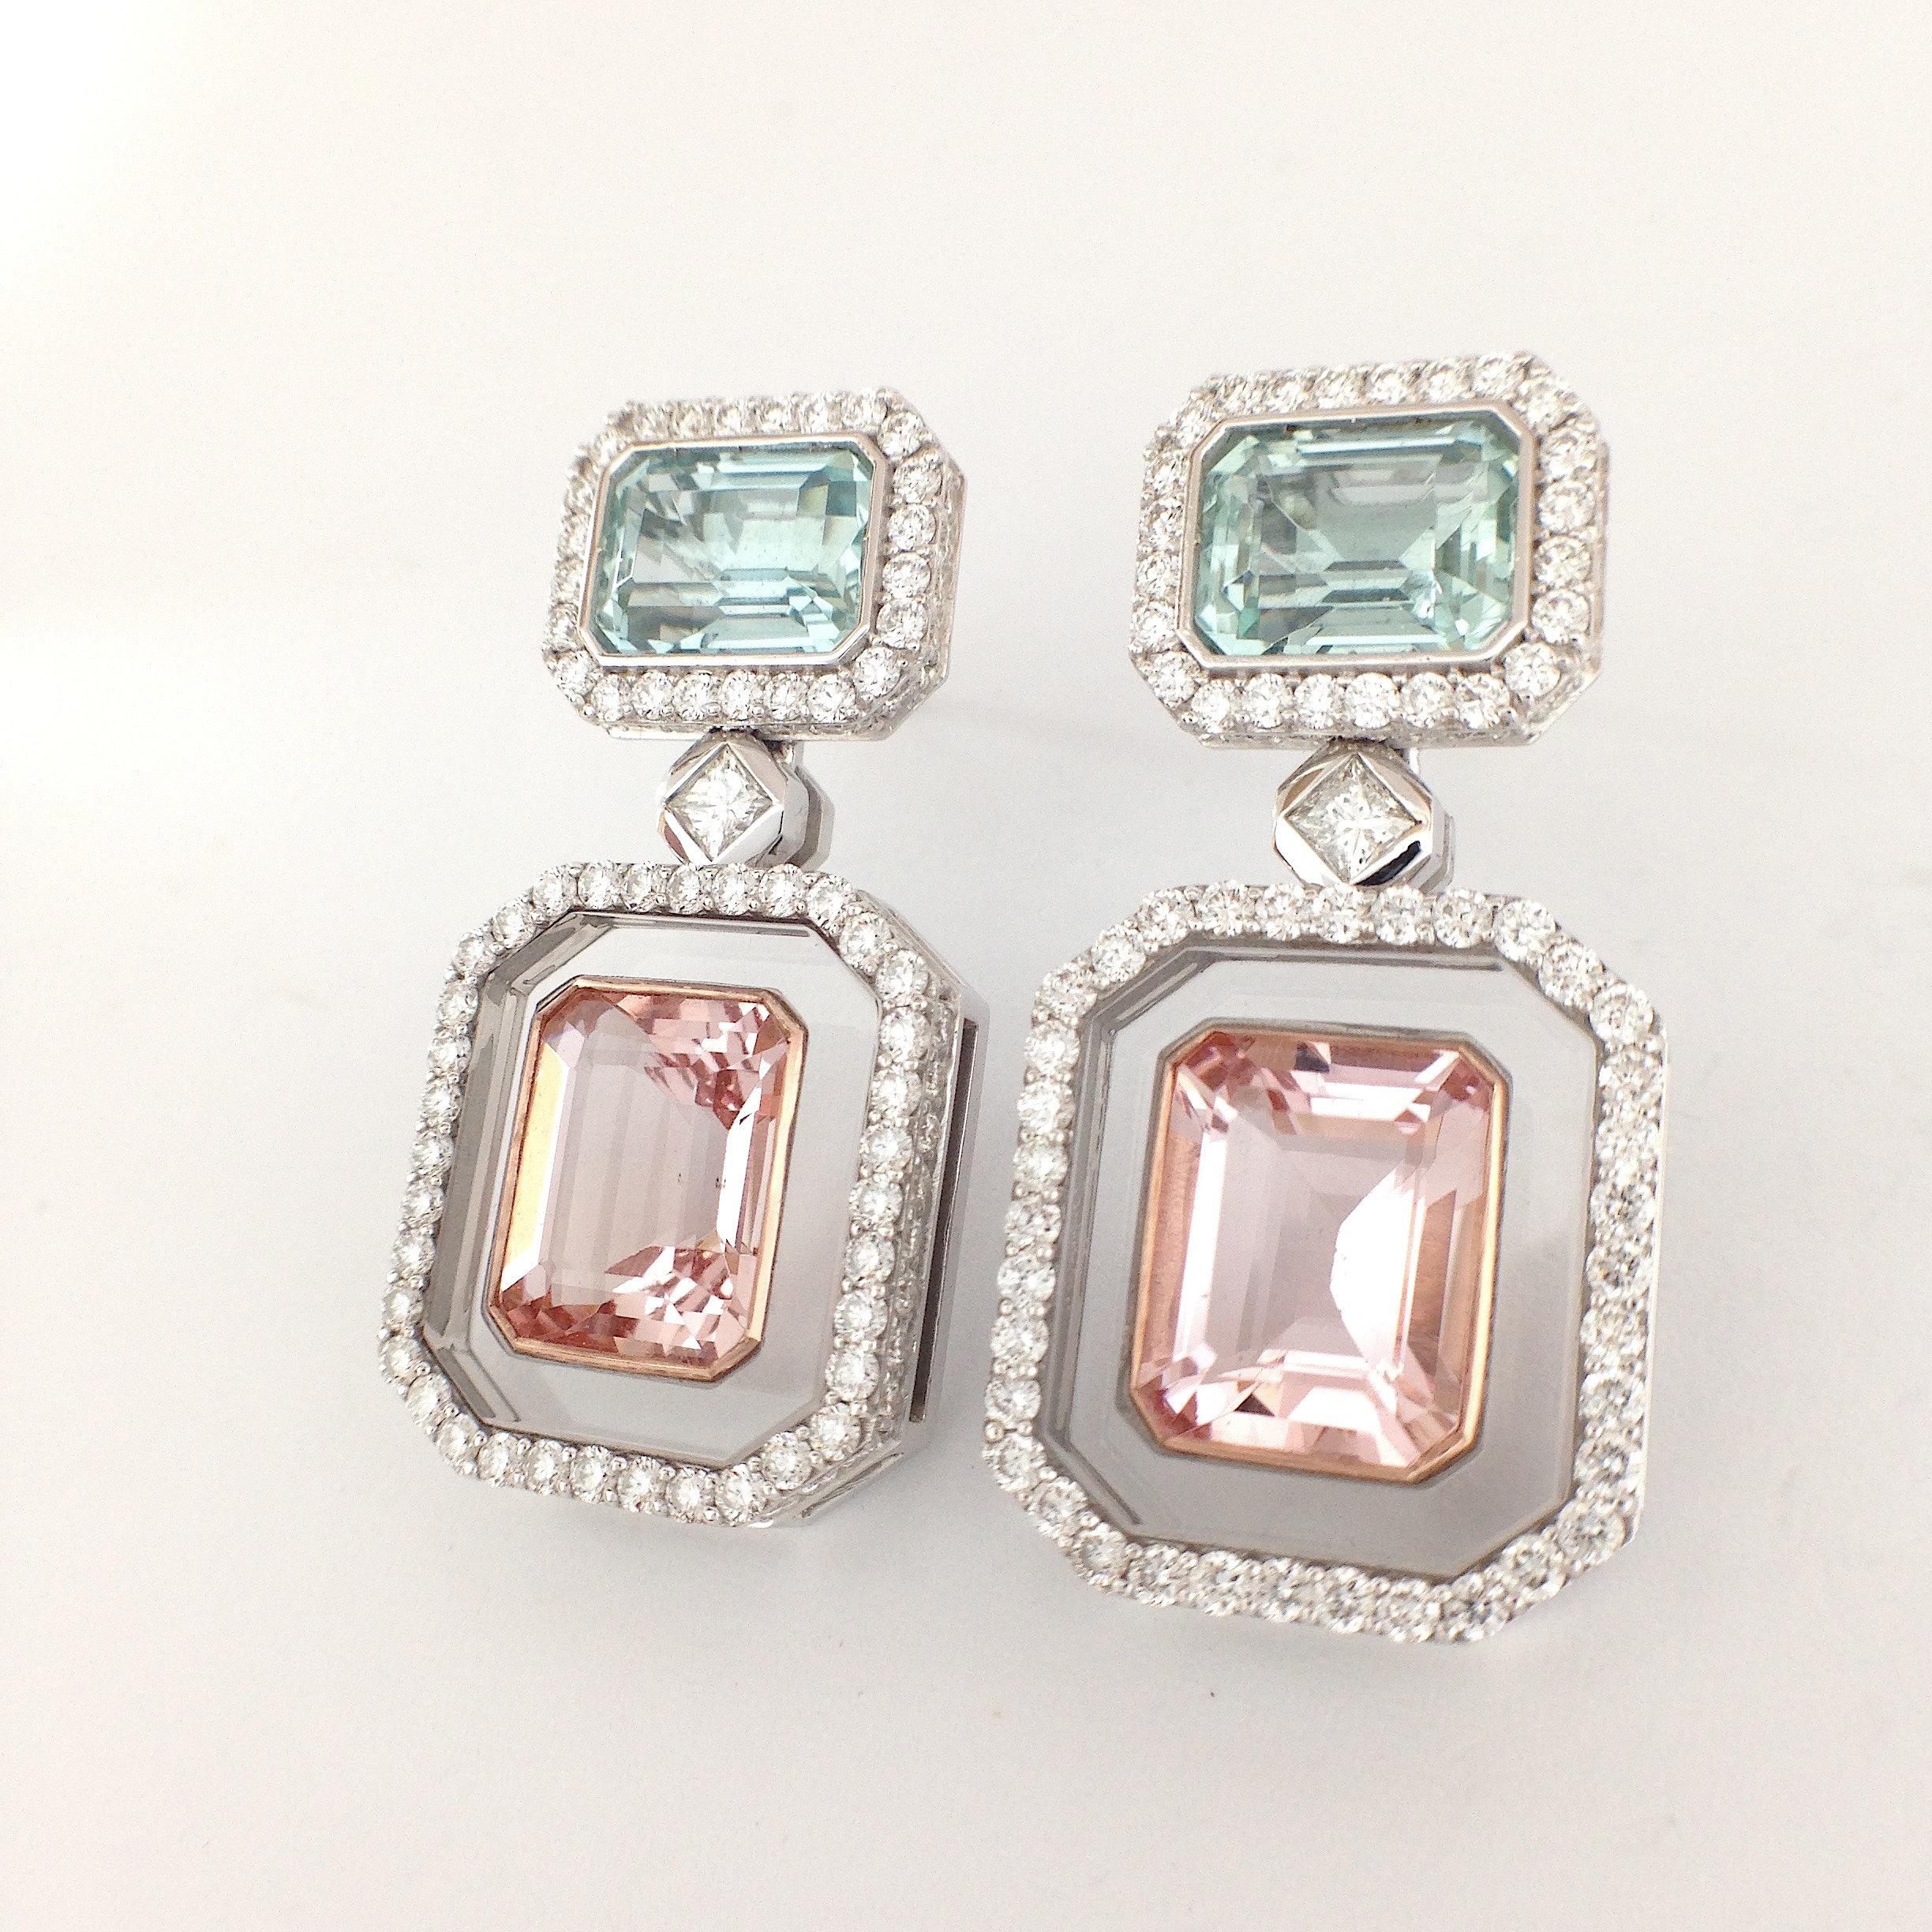 Morganite Green Beryl Diamond 18Kt Gold Rock Crystal Earrings and Jewelry Box In New Condition For Sale In Bussolengo, Verona